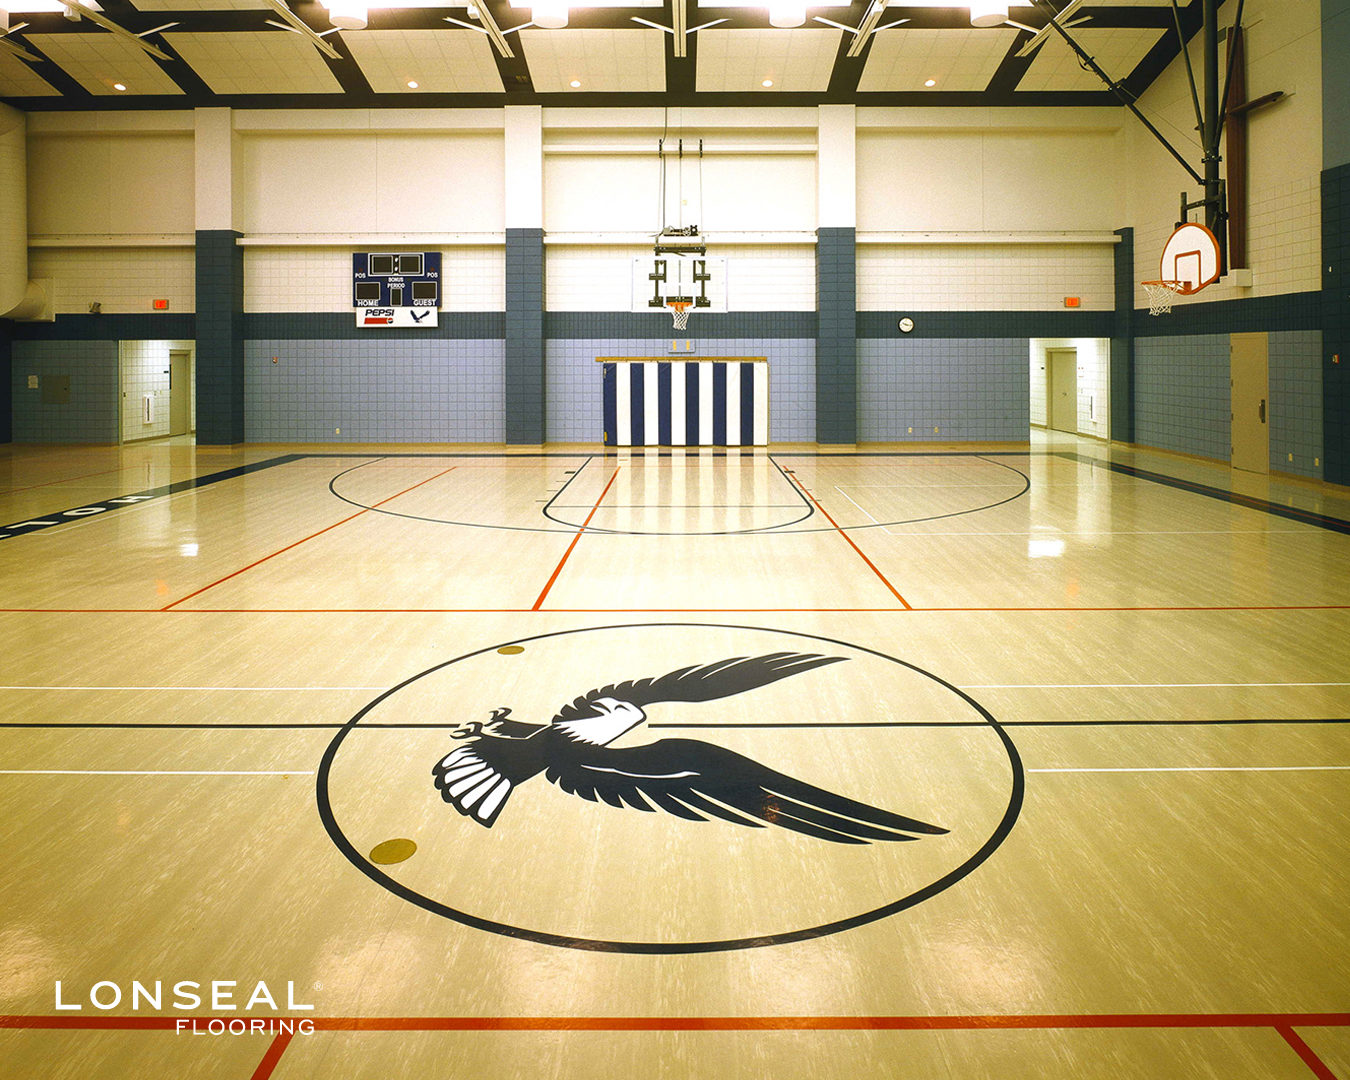 Lonseal, Sheet Vinyl Flooring, LONCOURT I is specifically designed for interior sports facilities where outstanding